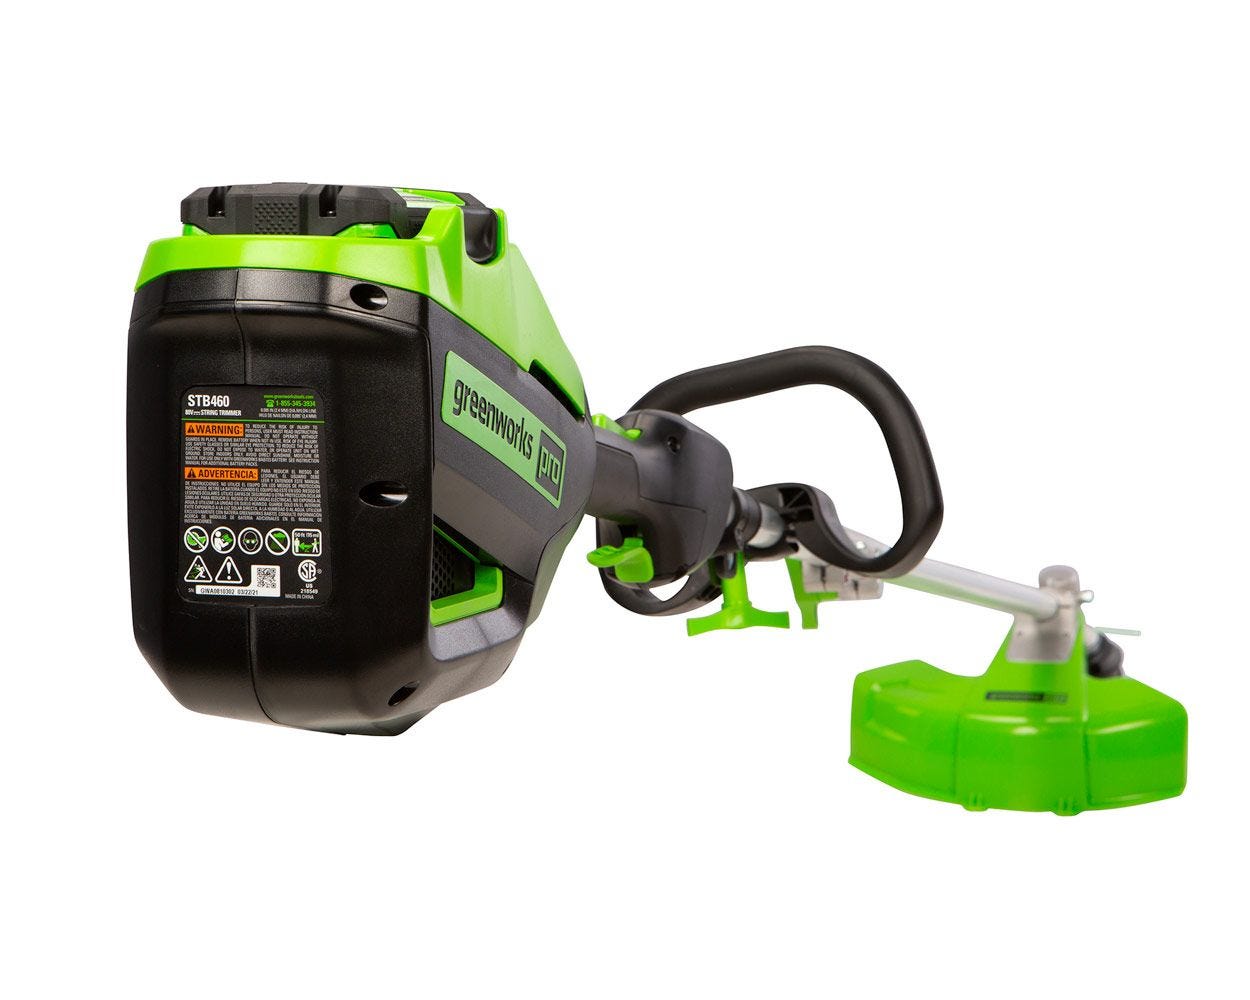 Greenworks 40V Cordless String Trimmer: Pros and Cons From an